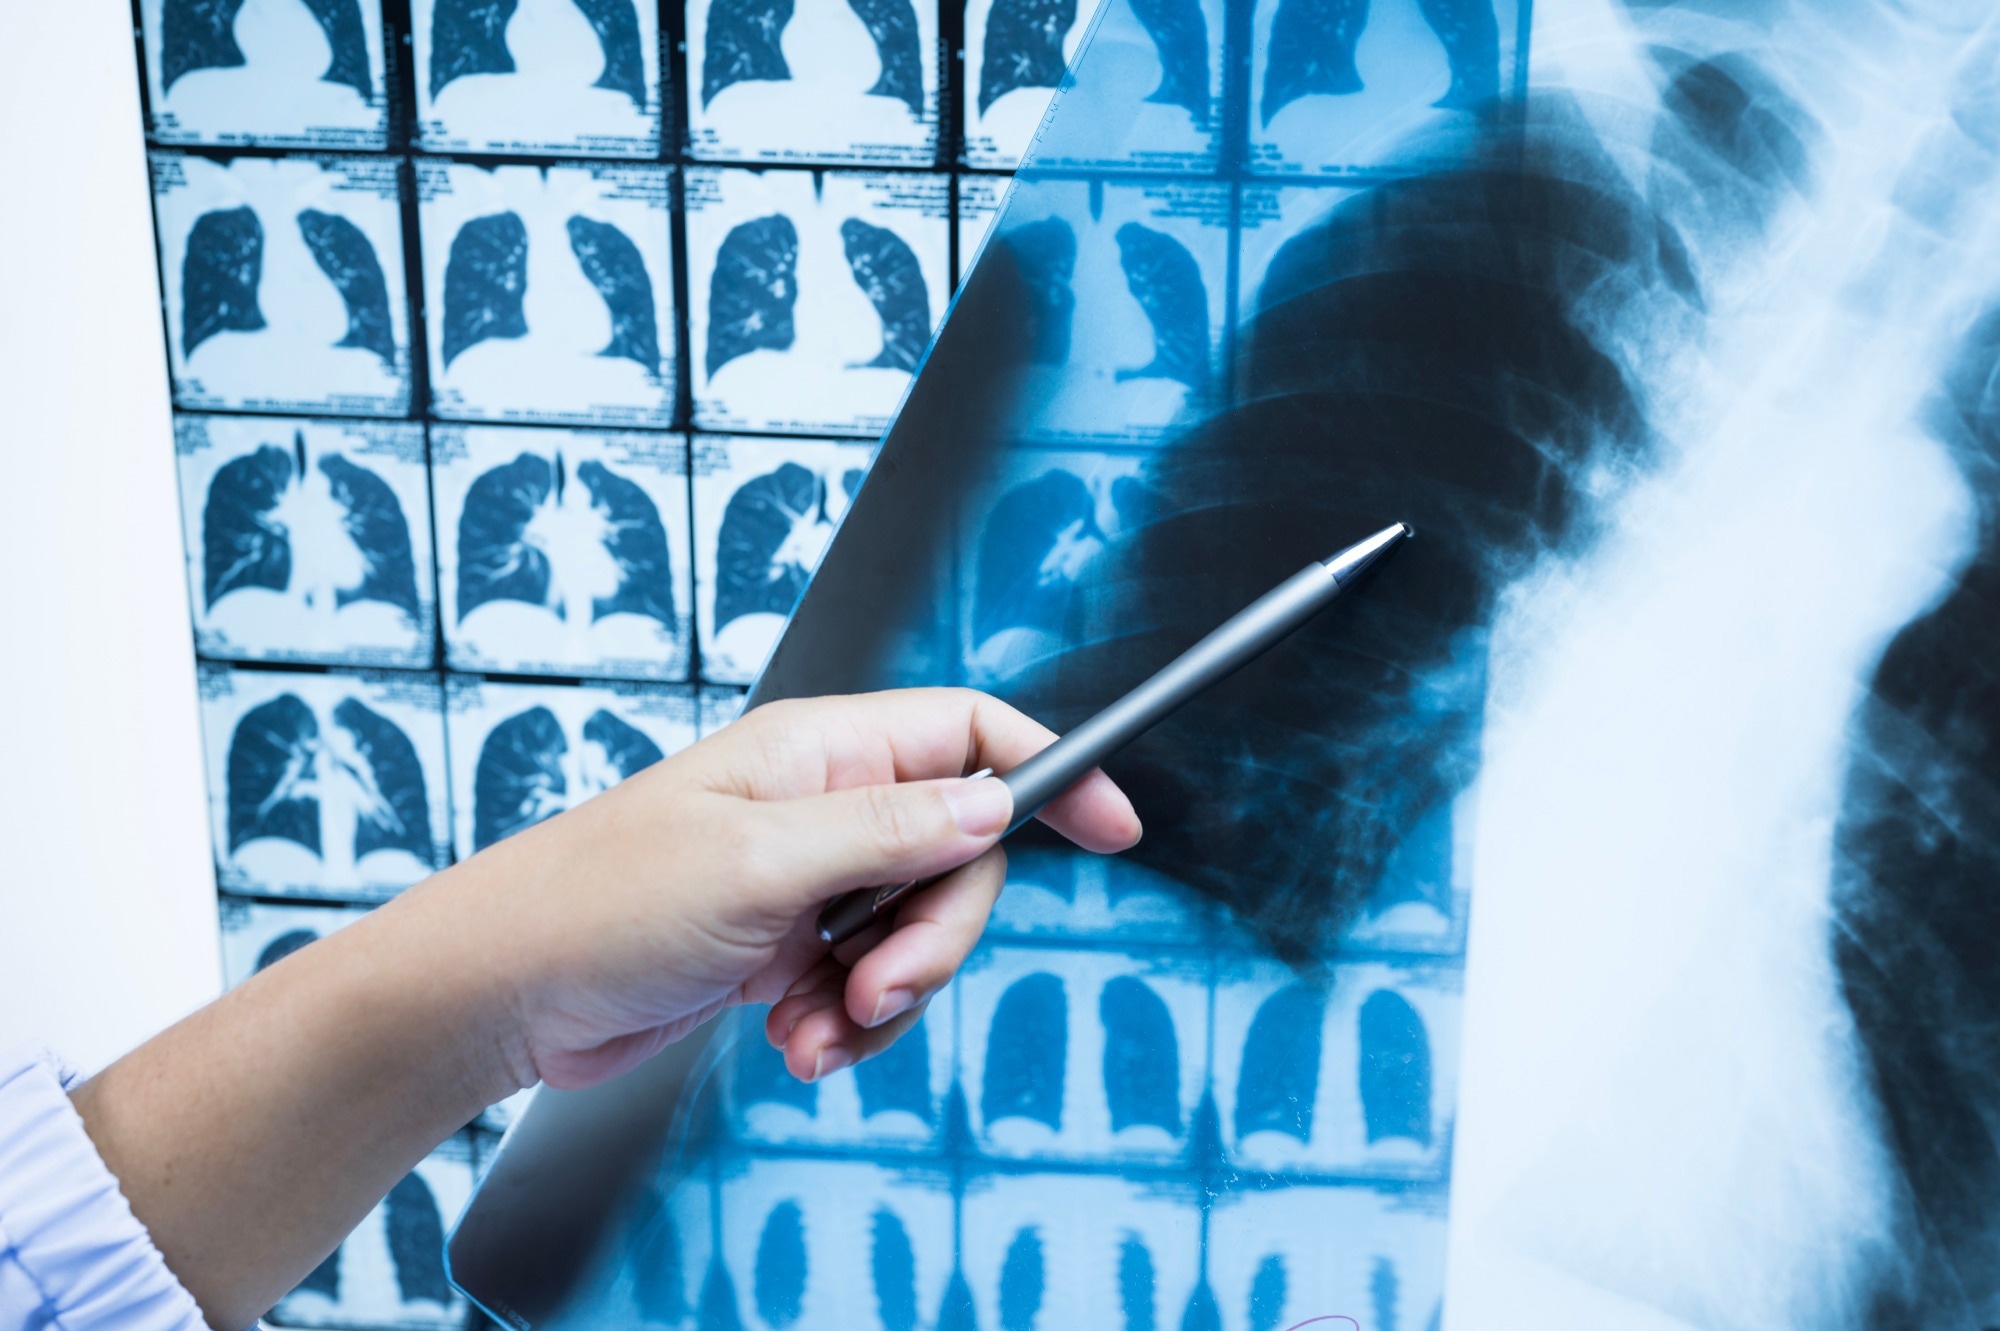 Study: Longitudinal Assessment of Chest CT Findings and Pulmonary Function in Patients after COVID-19. Image Credit: Komsan Loonprom / Shutterstock